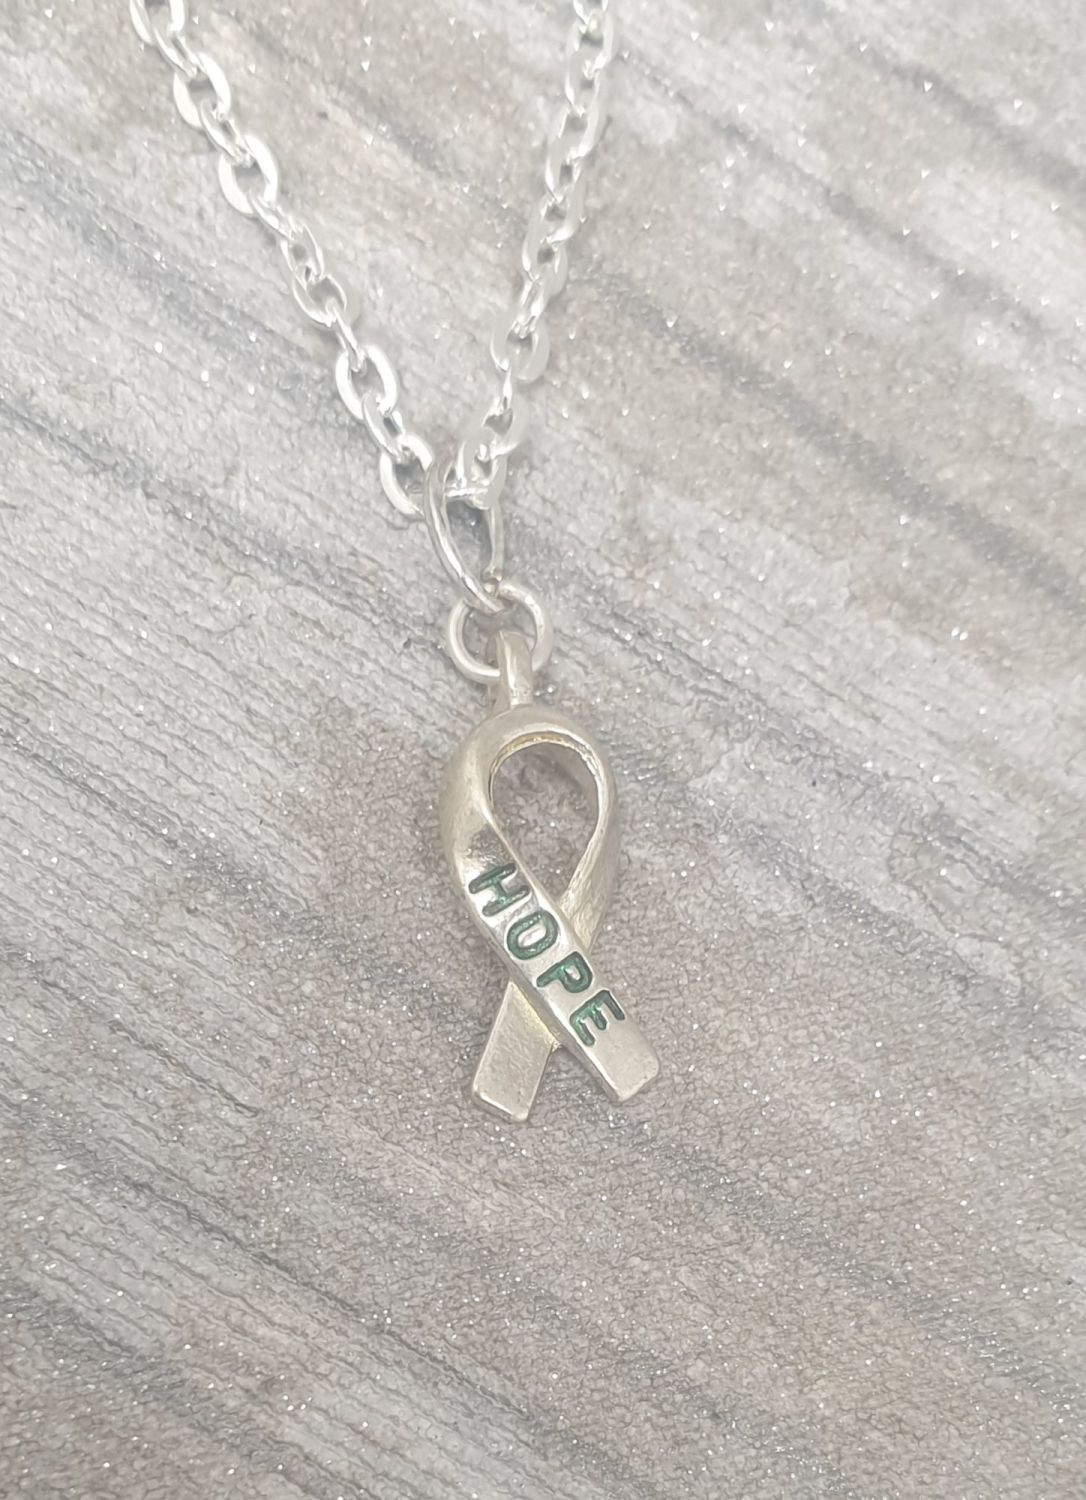 HOPE Ribbon Necklace - Mental Health Awareness - MIND Charity Item